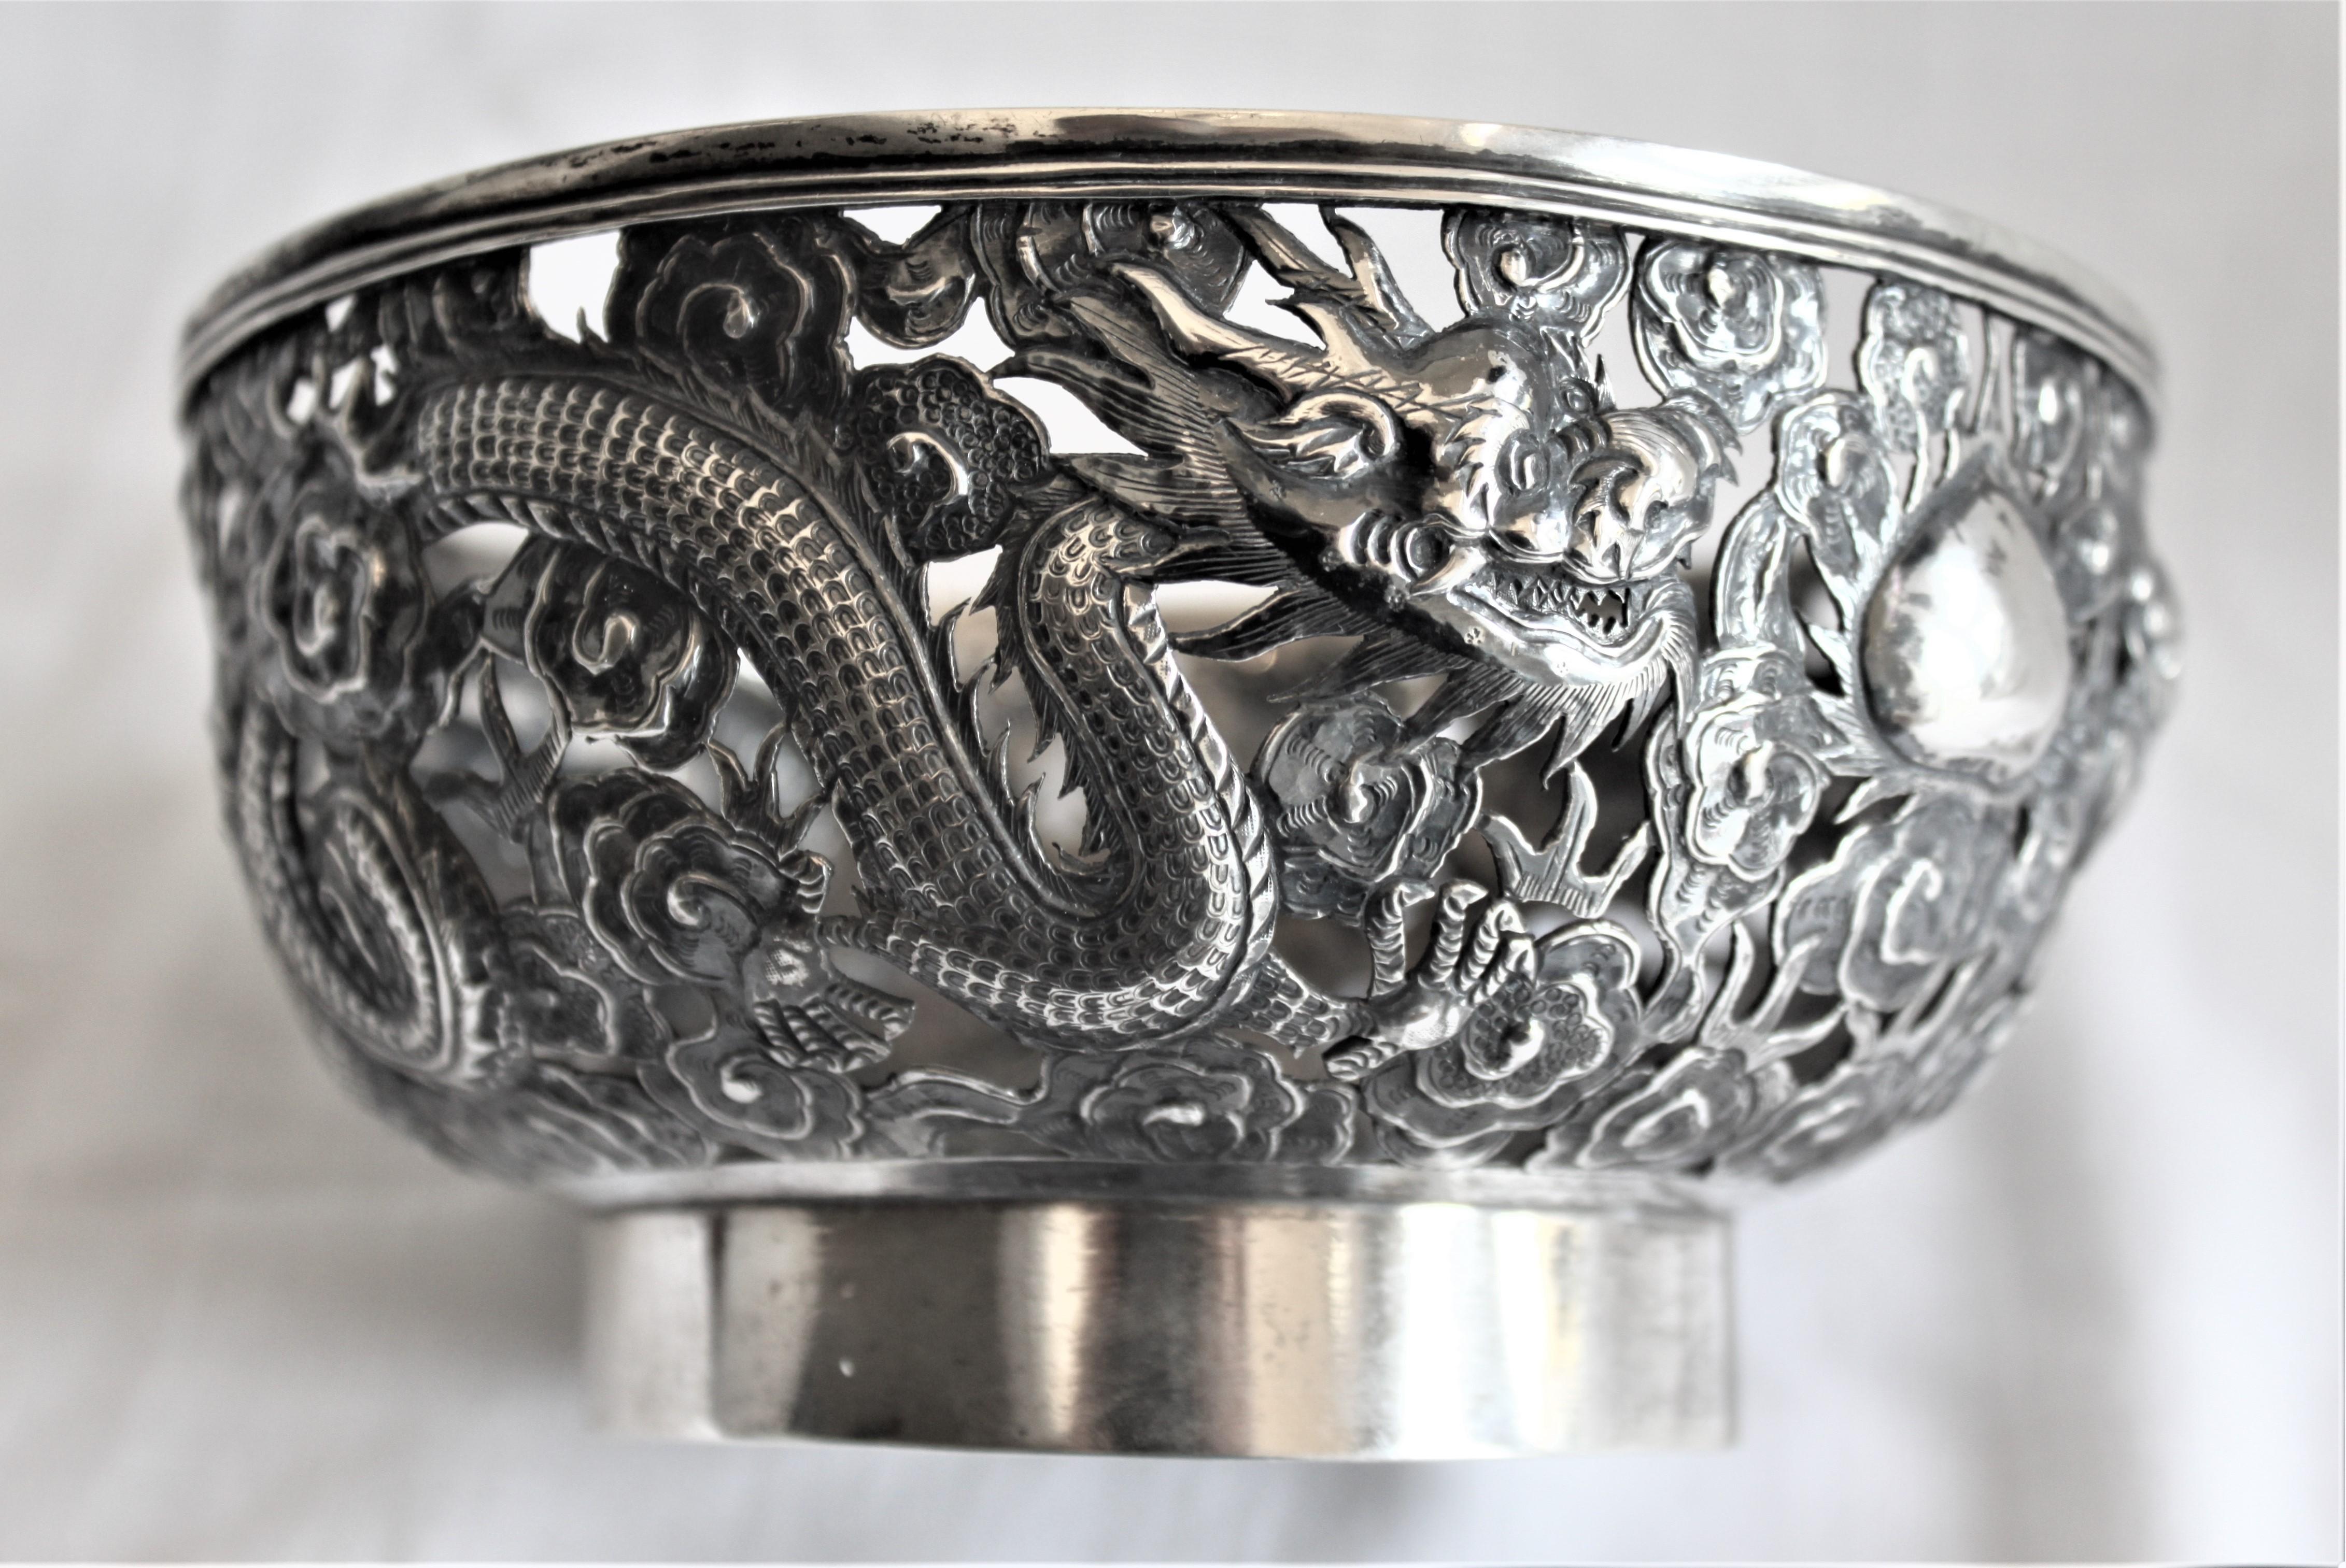 Antique Chinese Qing Dynasty Silver Bowl with Dragons and Flower Decoration In Good Condition For Sale In Hamilton, Ontario